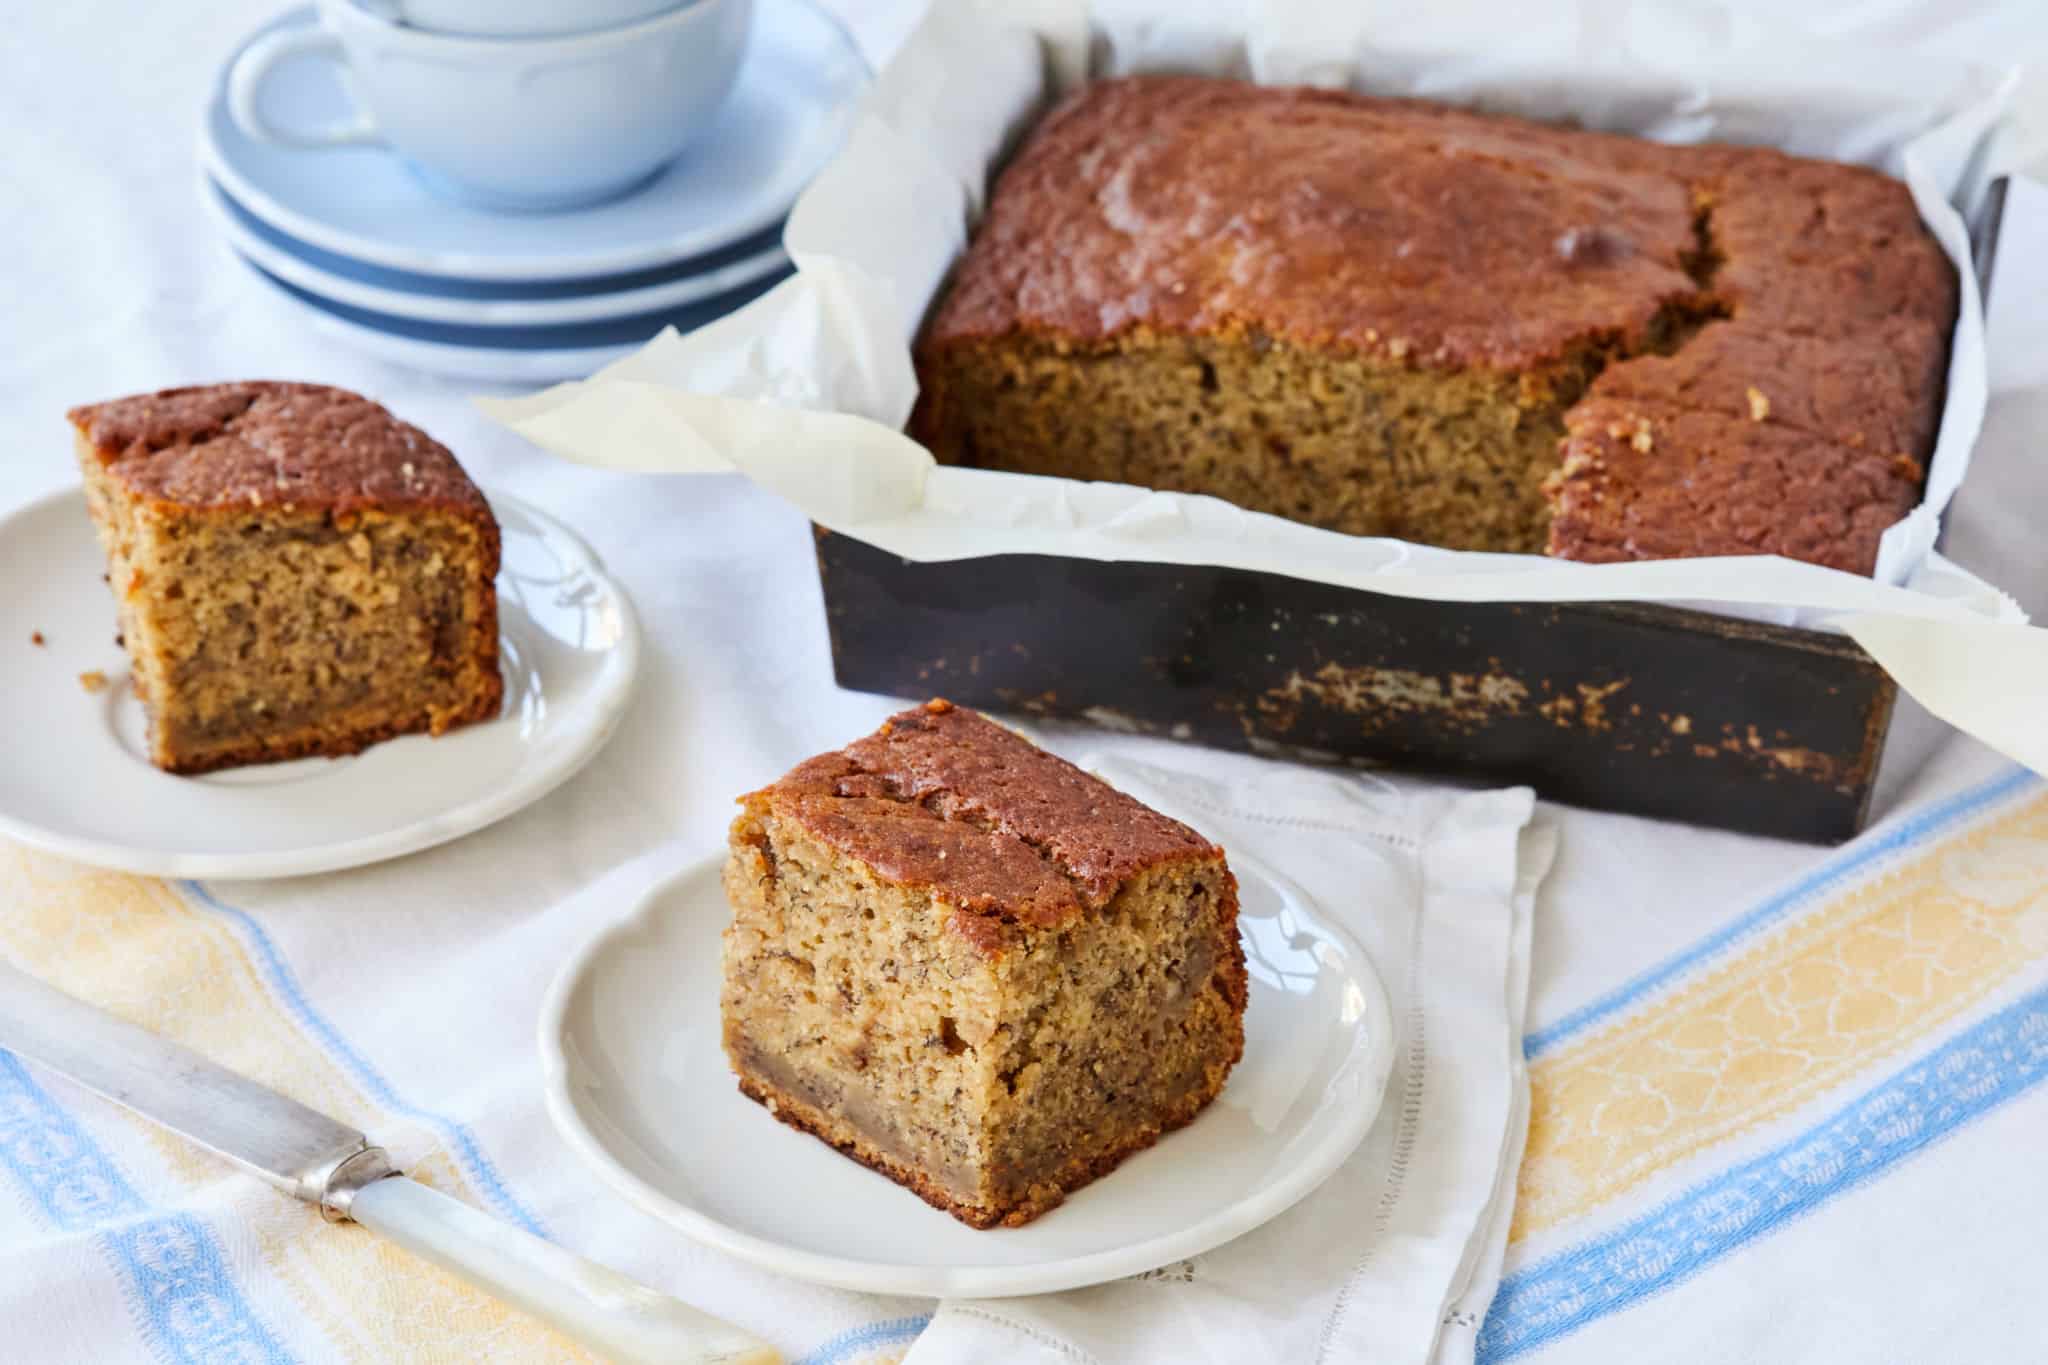 Two square slices of homemade sourdough banana bread are served on plates next to the loaf in the baking pan.